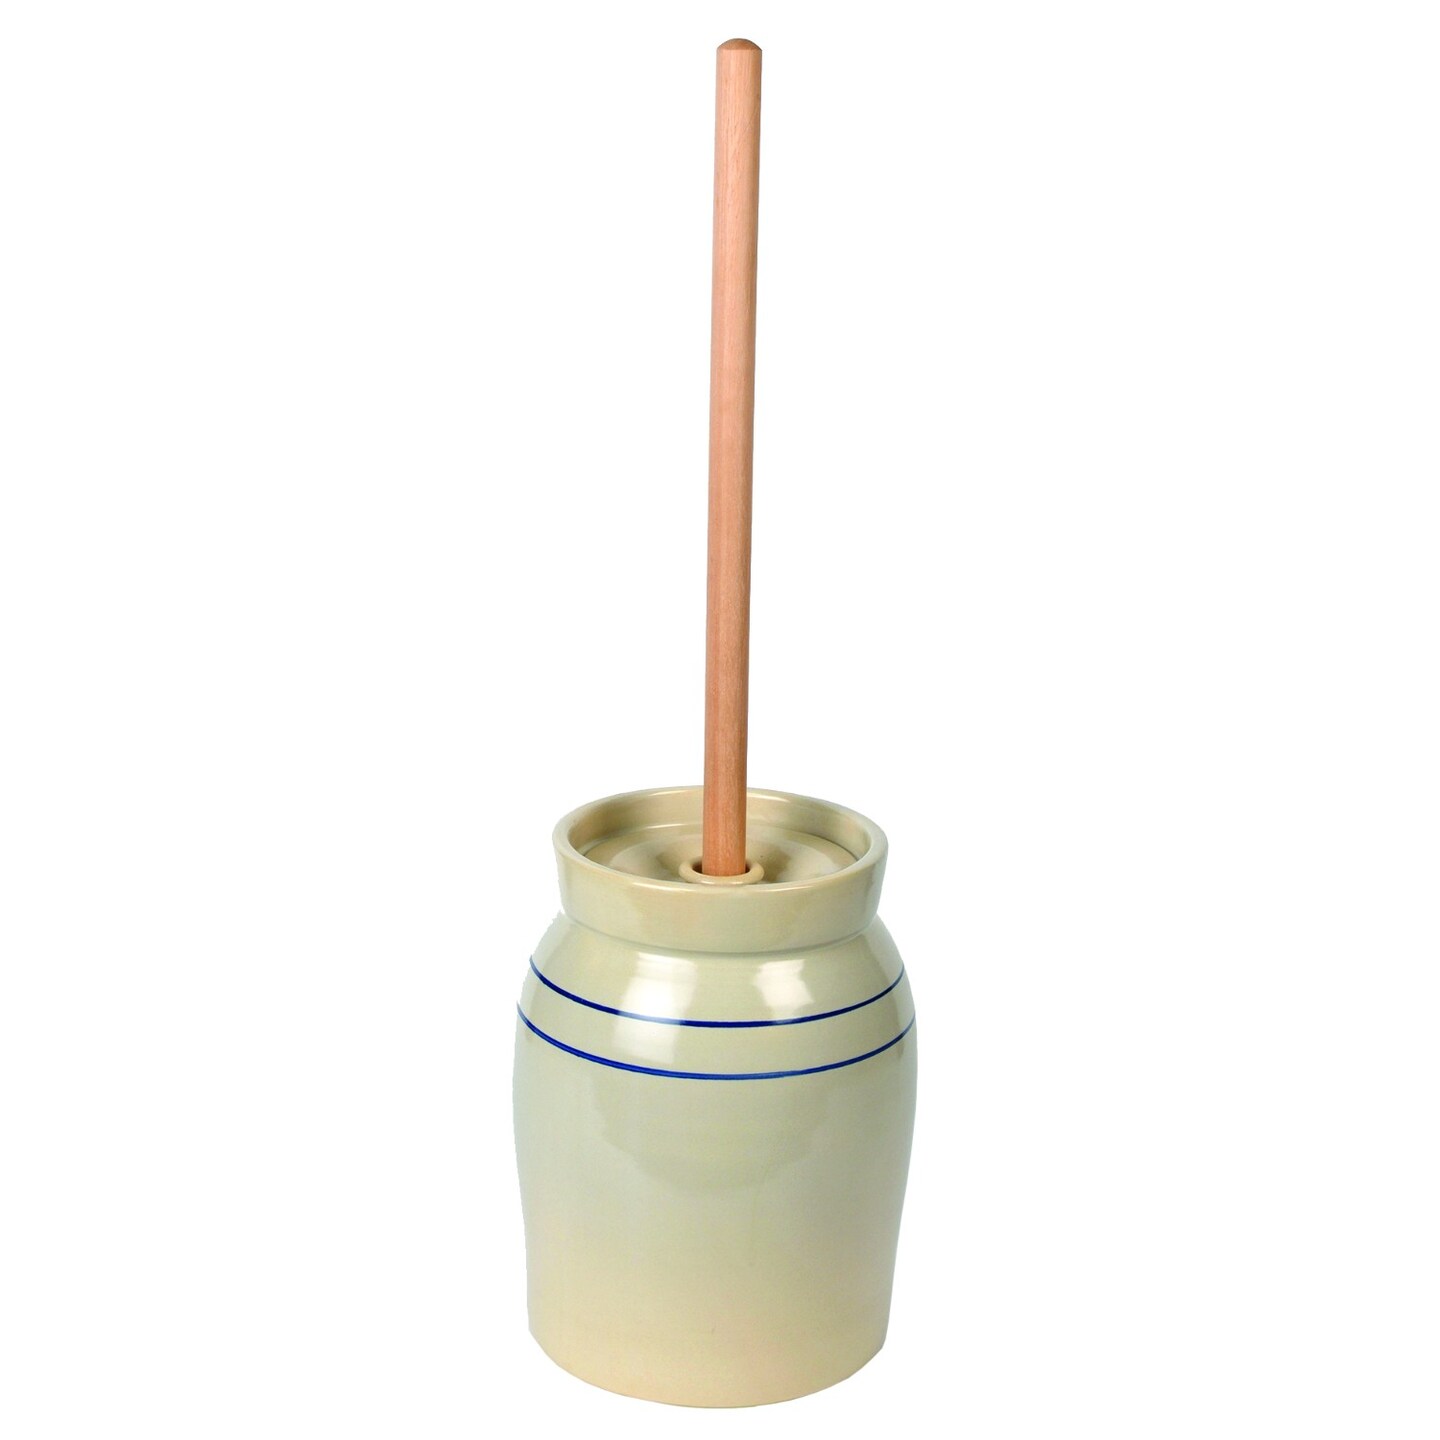 Hand-Turned Pottery Butter Churn